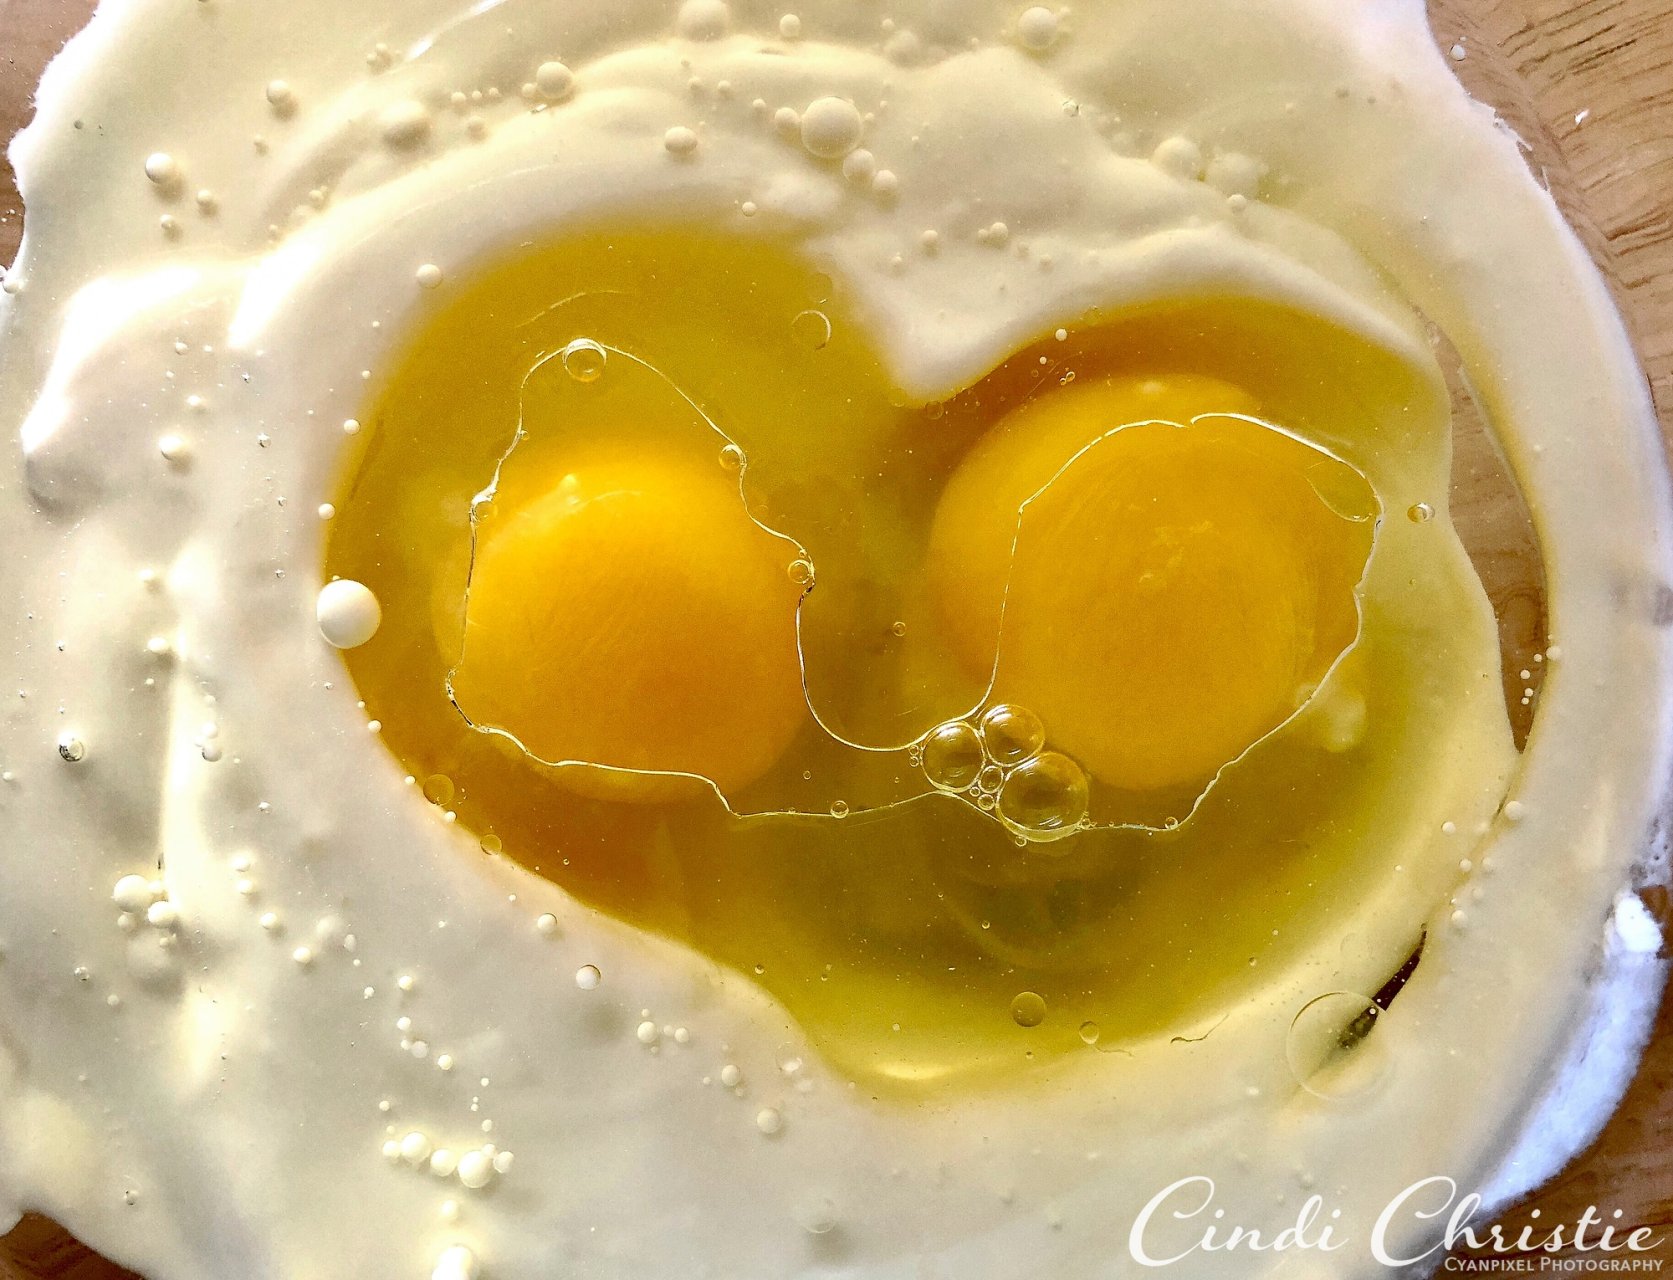 Eggs dropped into a mixture of vegetable oil and plain yogurt form the shape of a heart on Thursday, Sept. 6, 2018, in Salmon, Idaho. The ingredients are part of a loaf of zucchini bread. (Cindi Christie/Cyanpixel Photography)